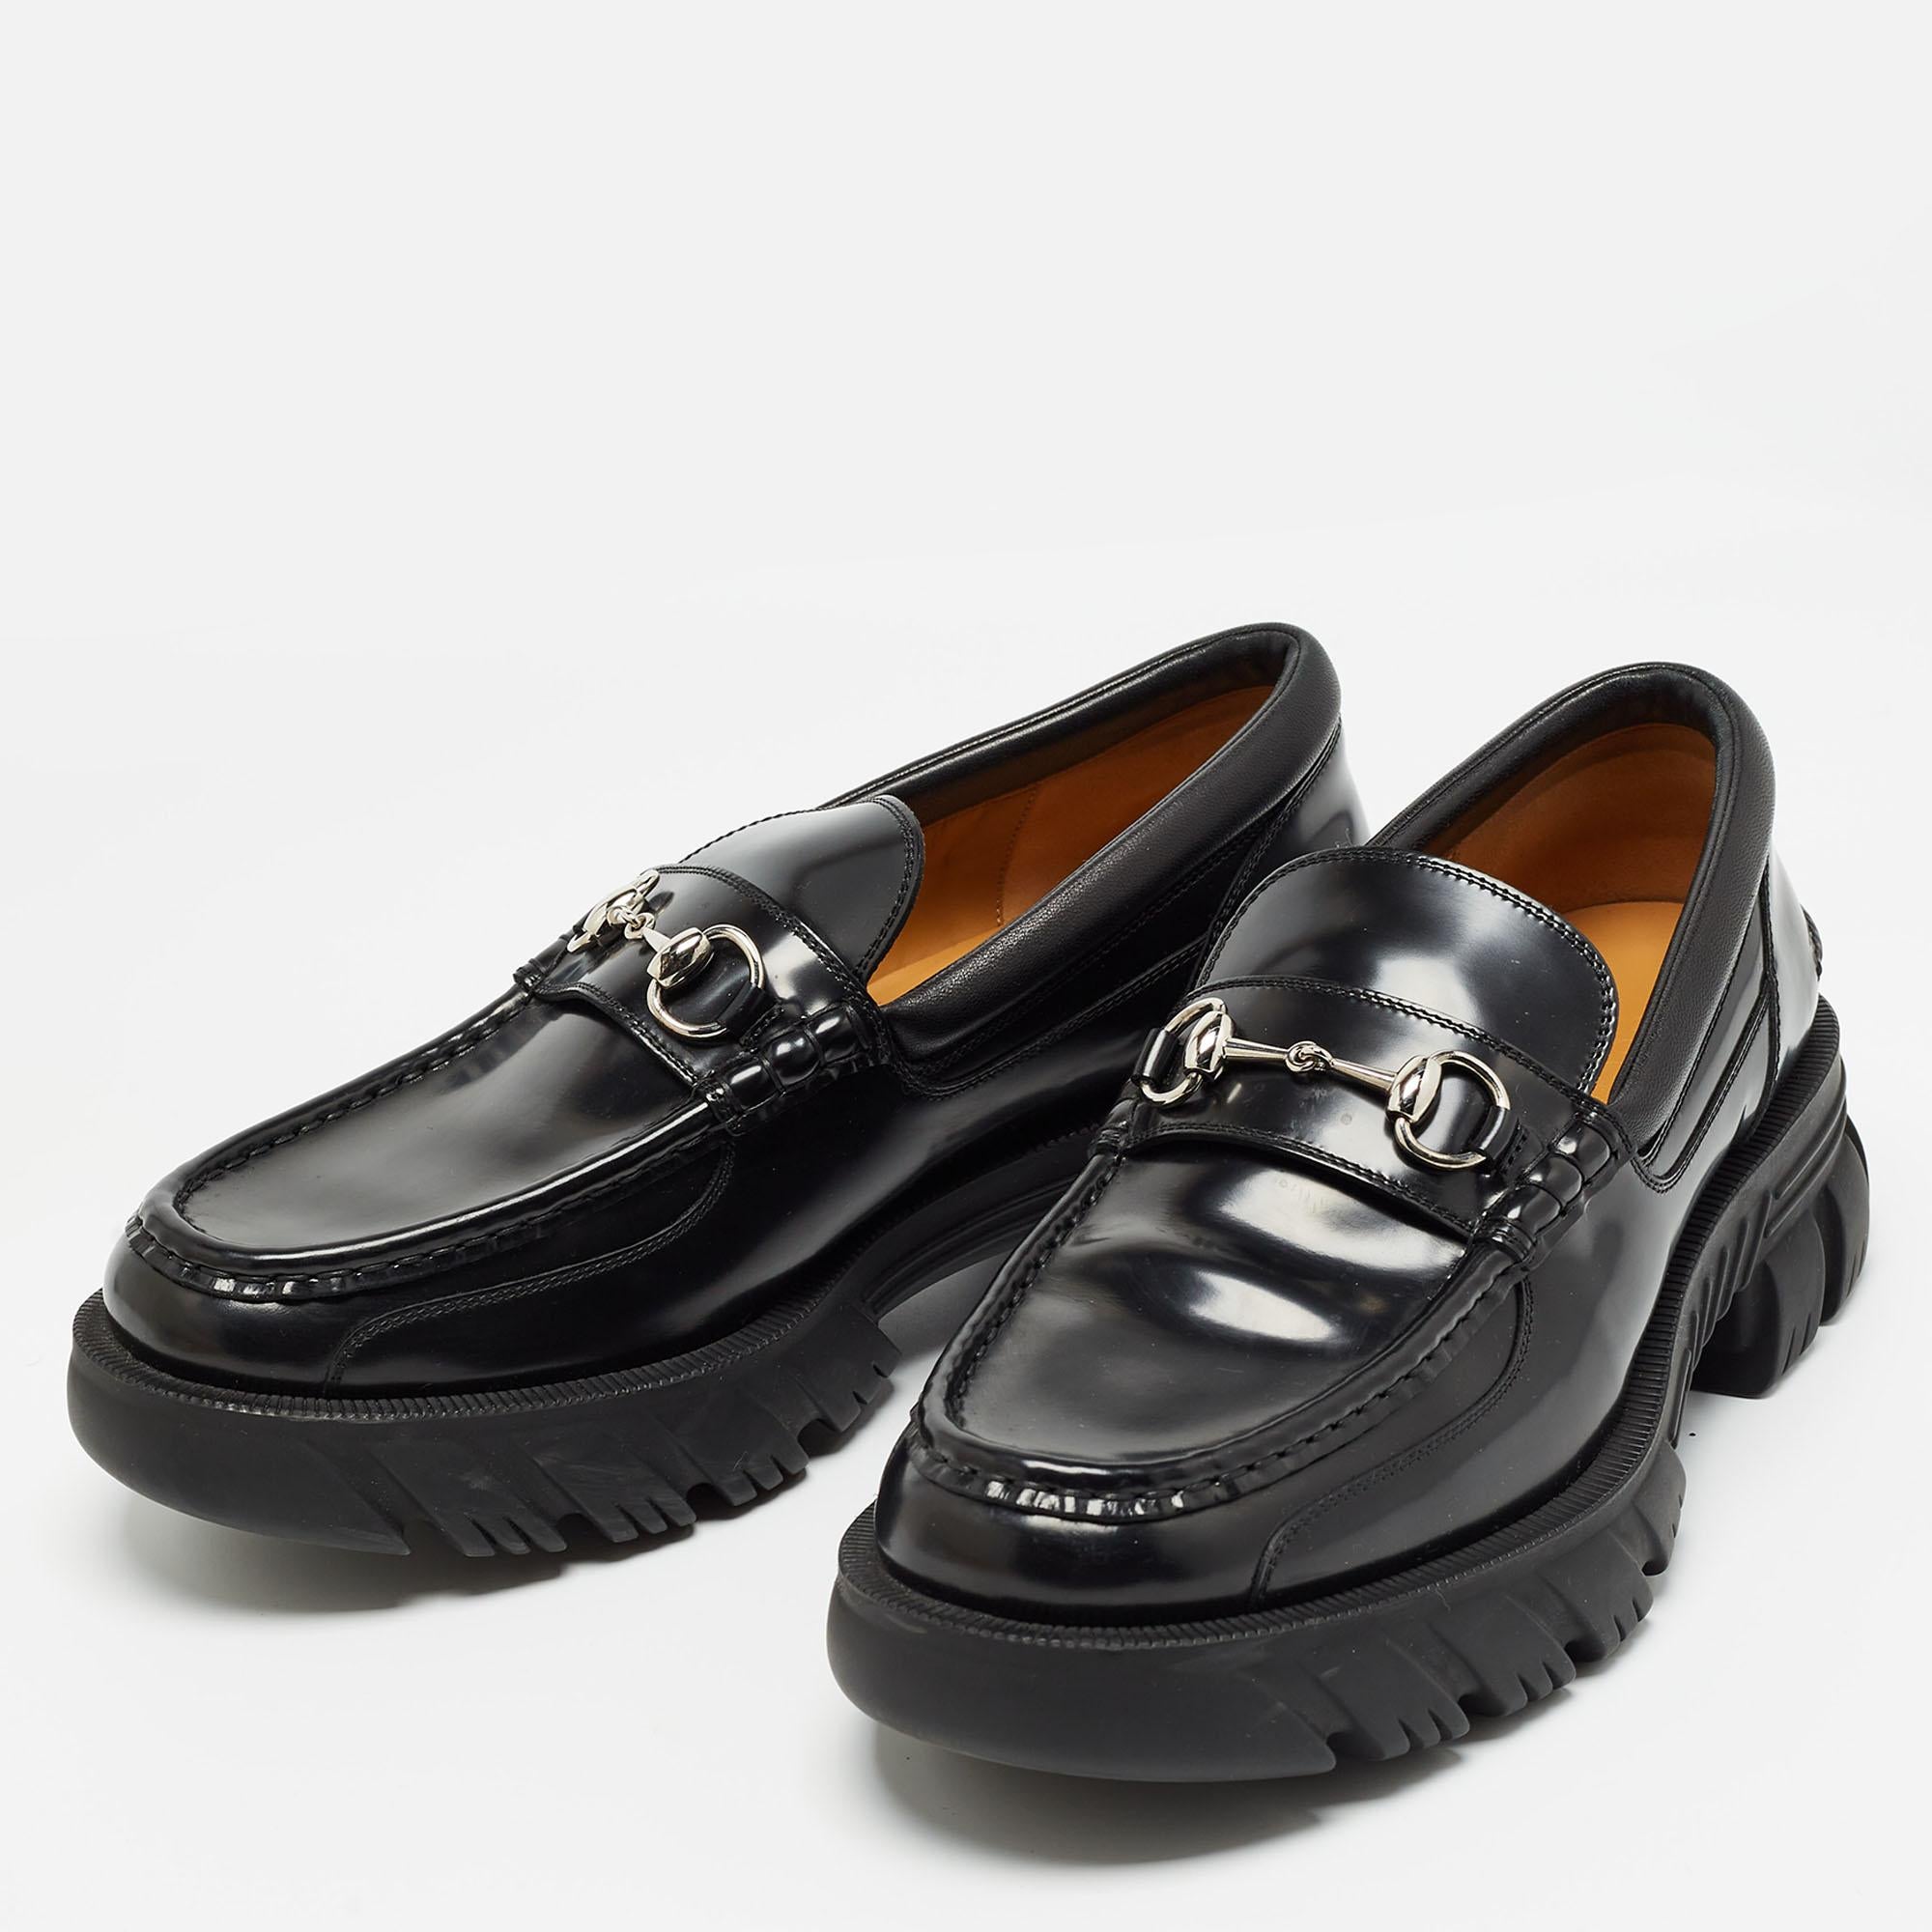 Gucci Black Leather Horsebit Slip On Loafers Size 44.5 For Sale 3